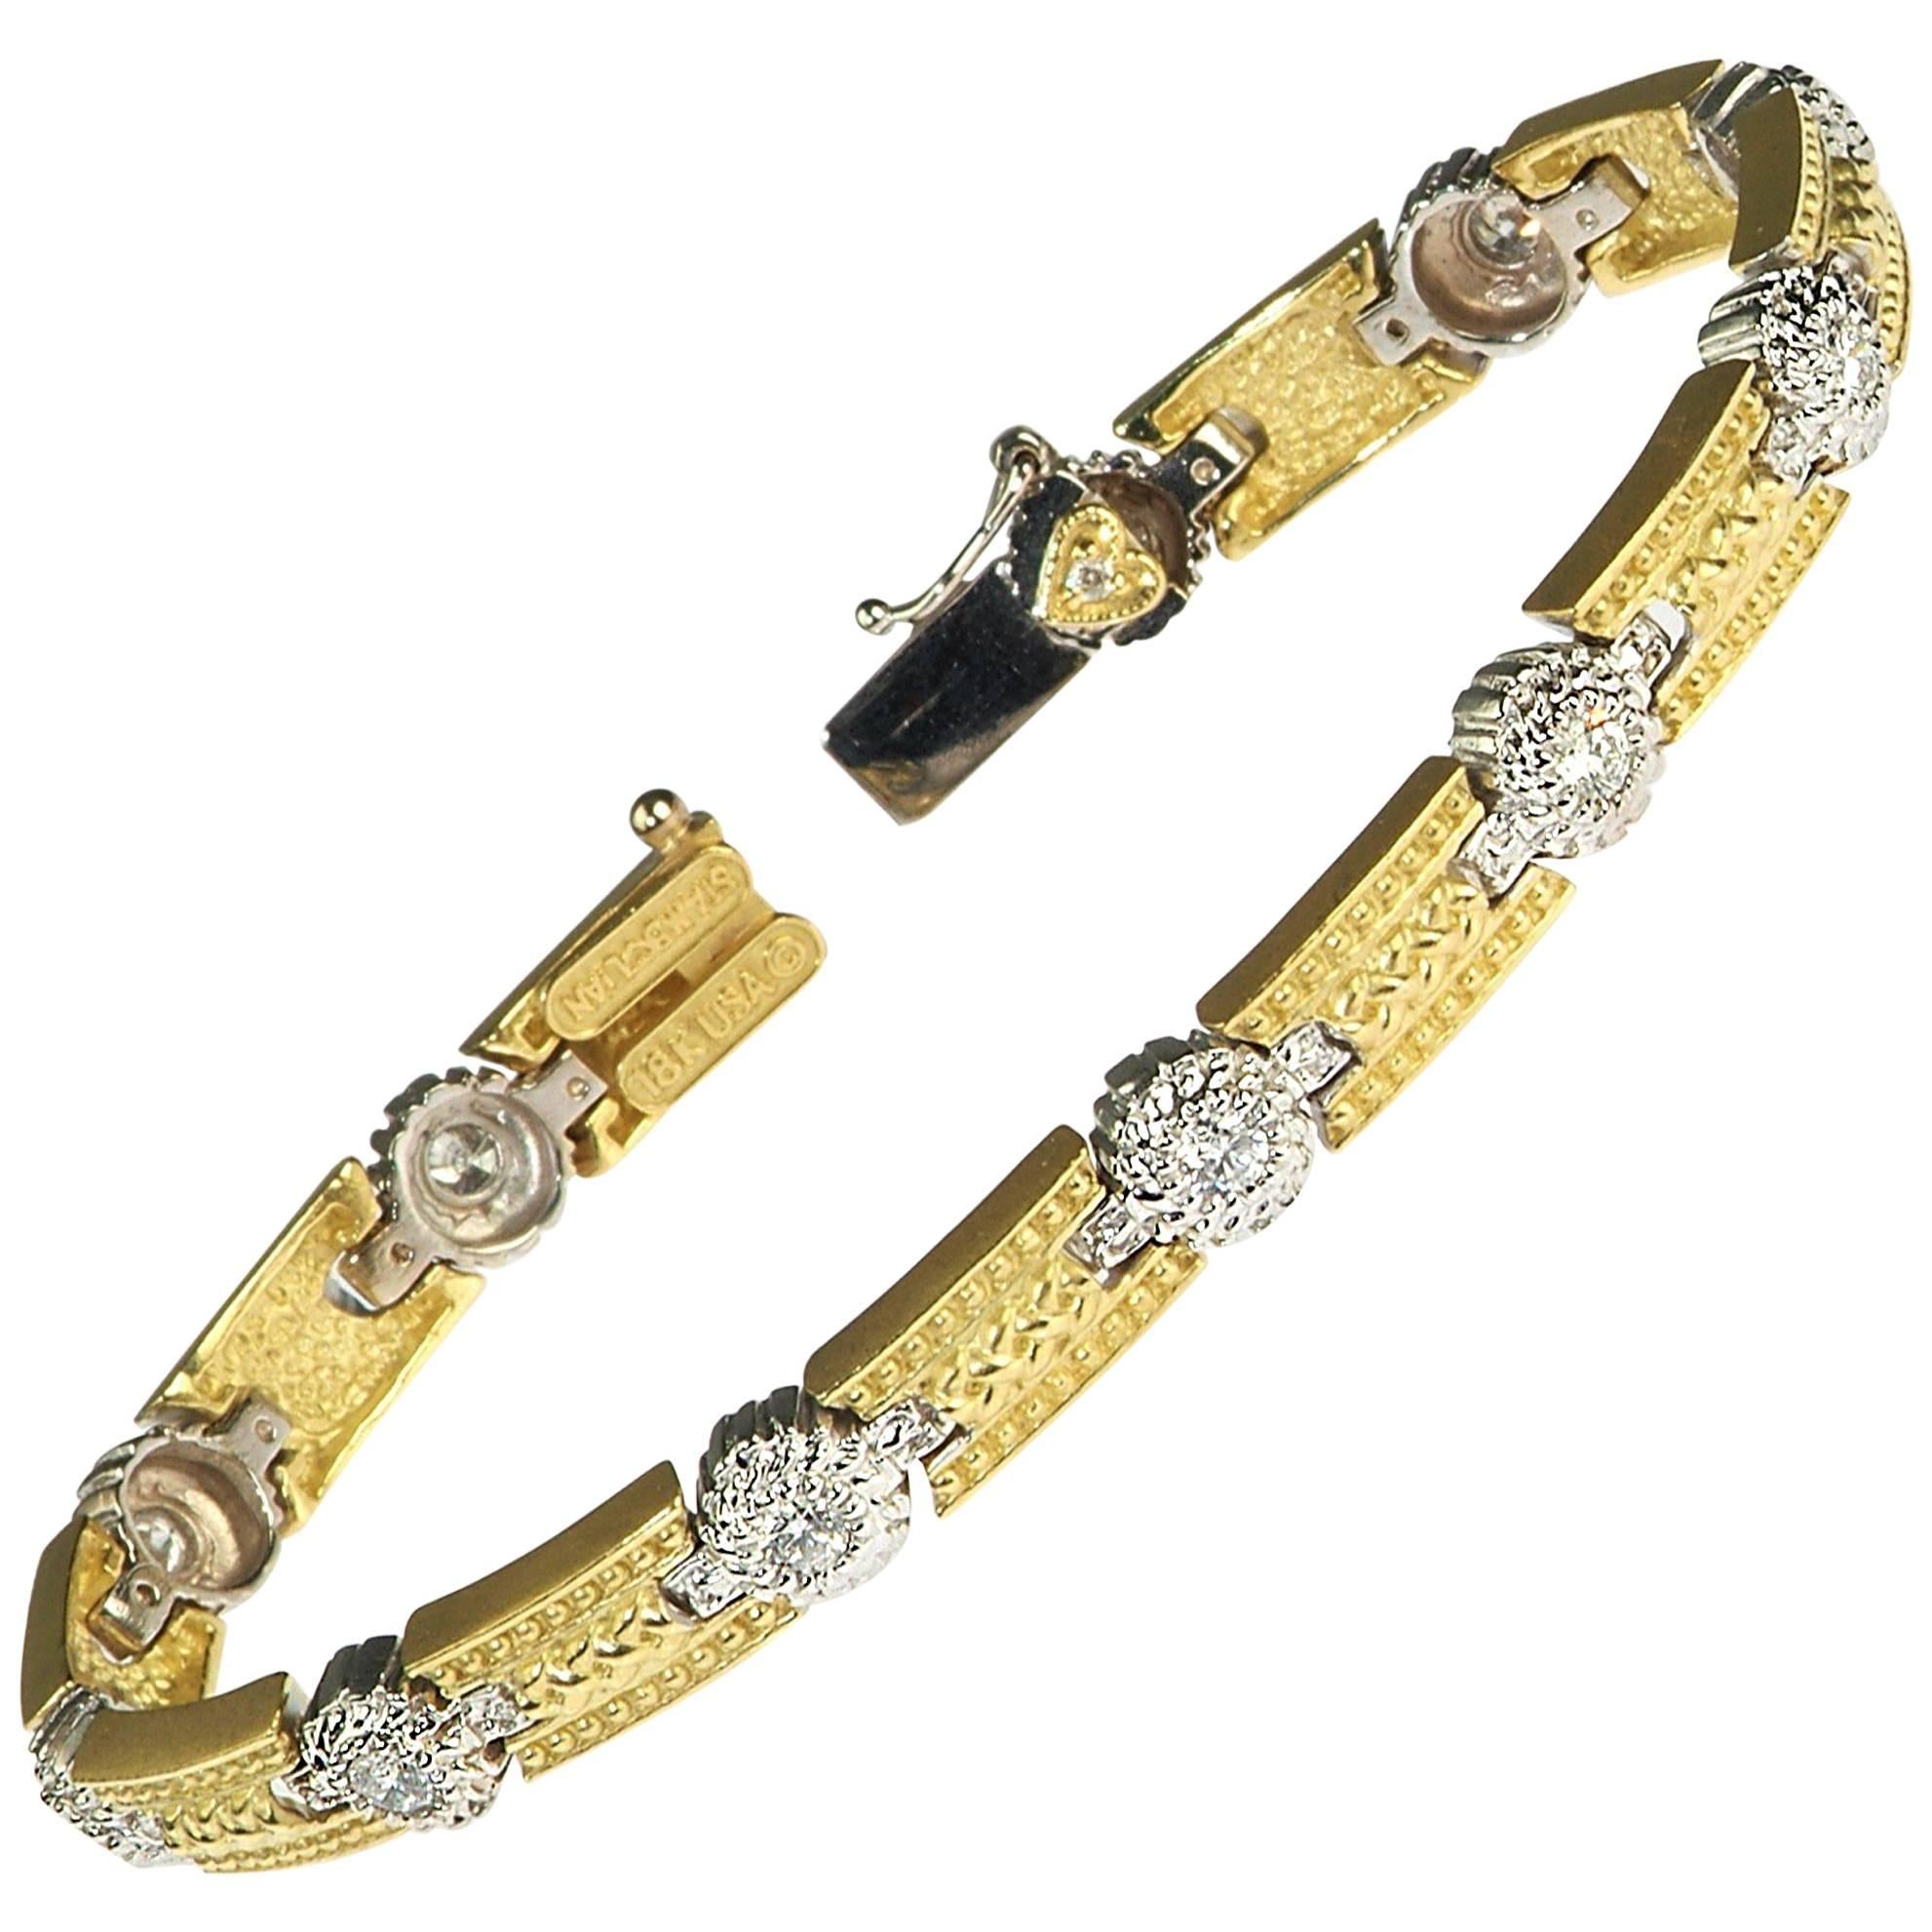 18K Yellow and White Two-Tone Gold Tennis Bracelet with Bezel Set Diamonds by Stambolian

This unique style tennis bracelet features bezel-set diamonds in white gold with yellow gold connections.

1.10 carat G Color, VS Clarity diamonds

Tongue